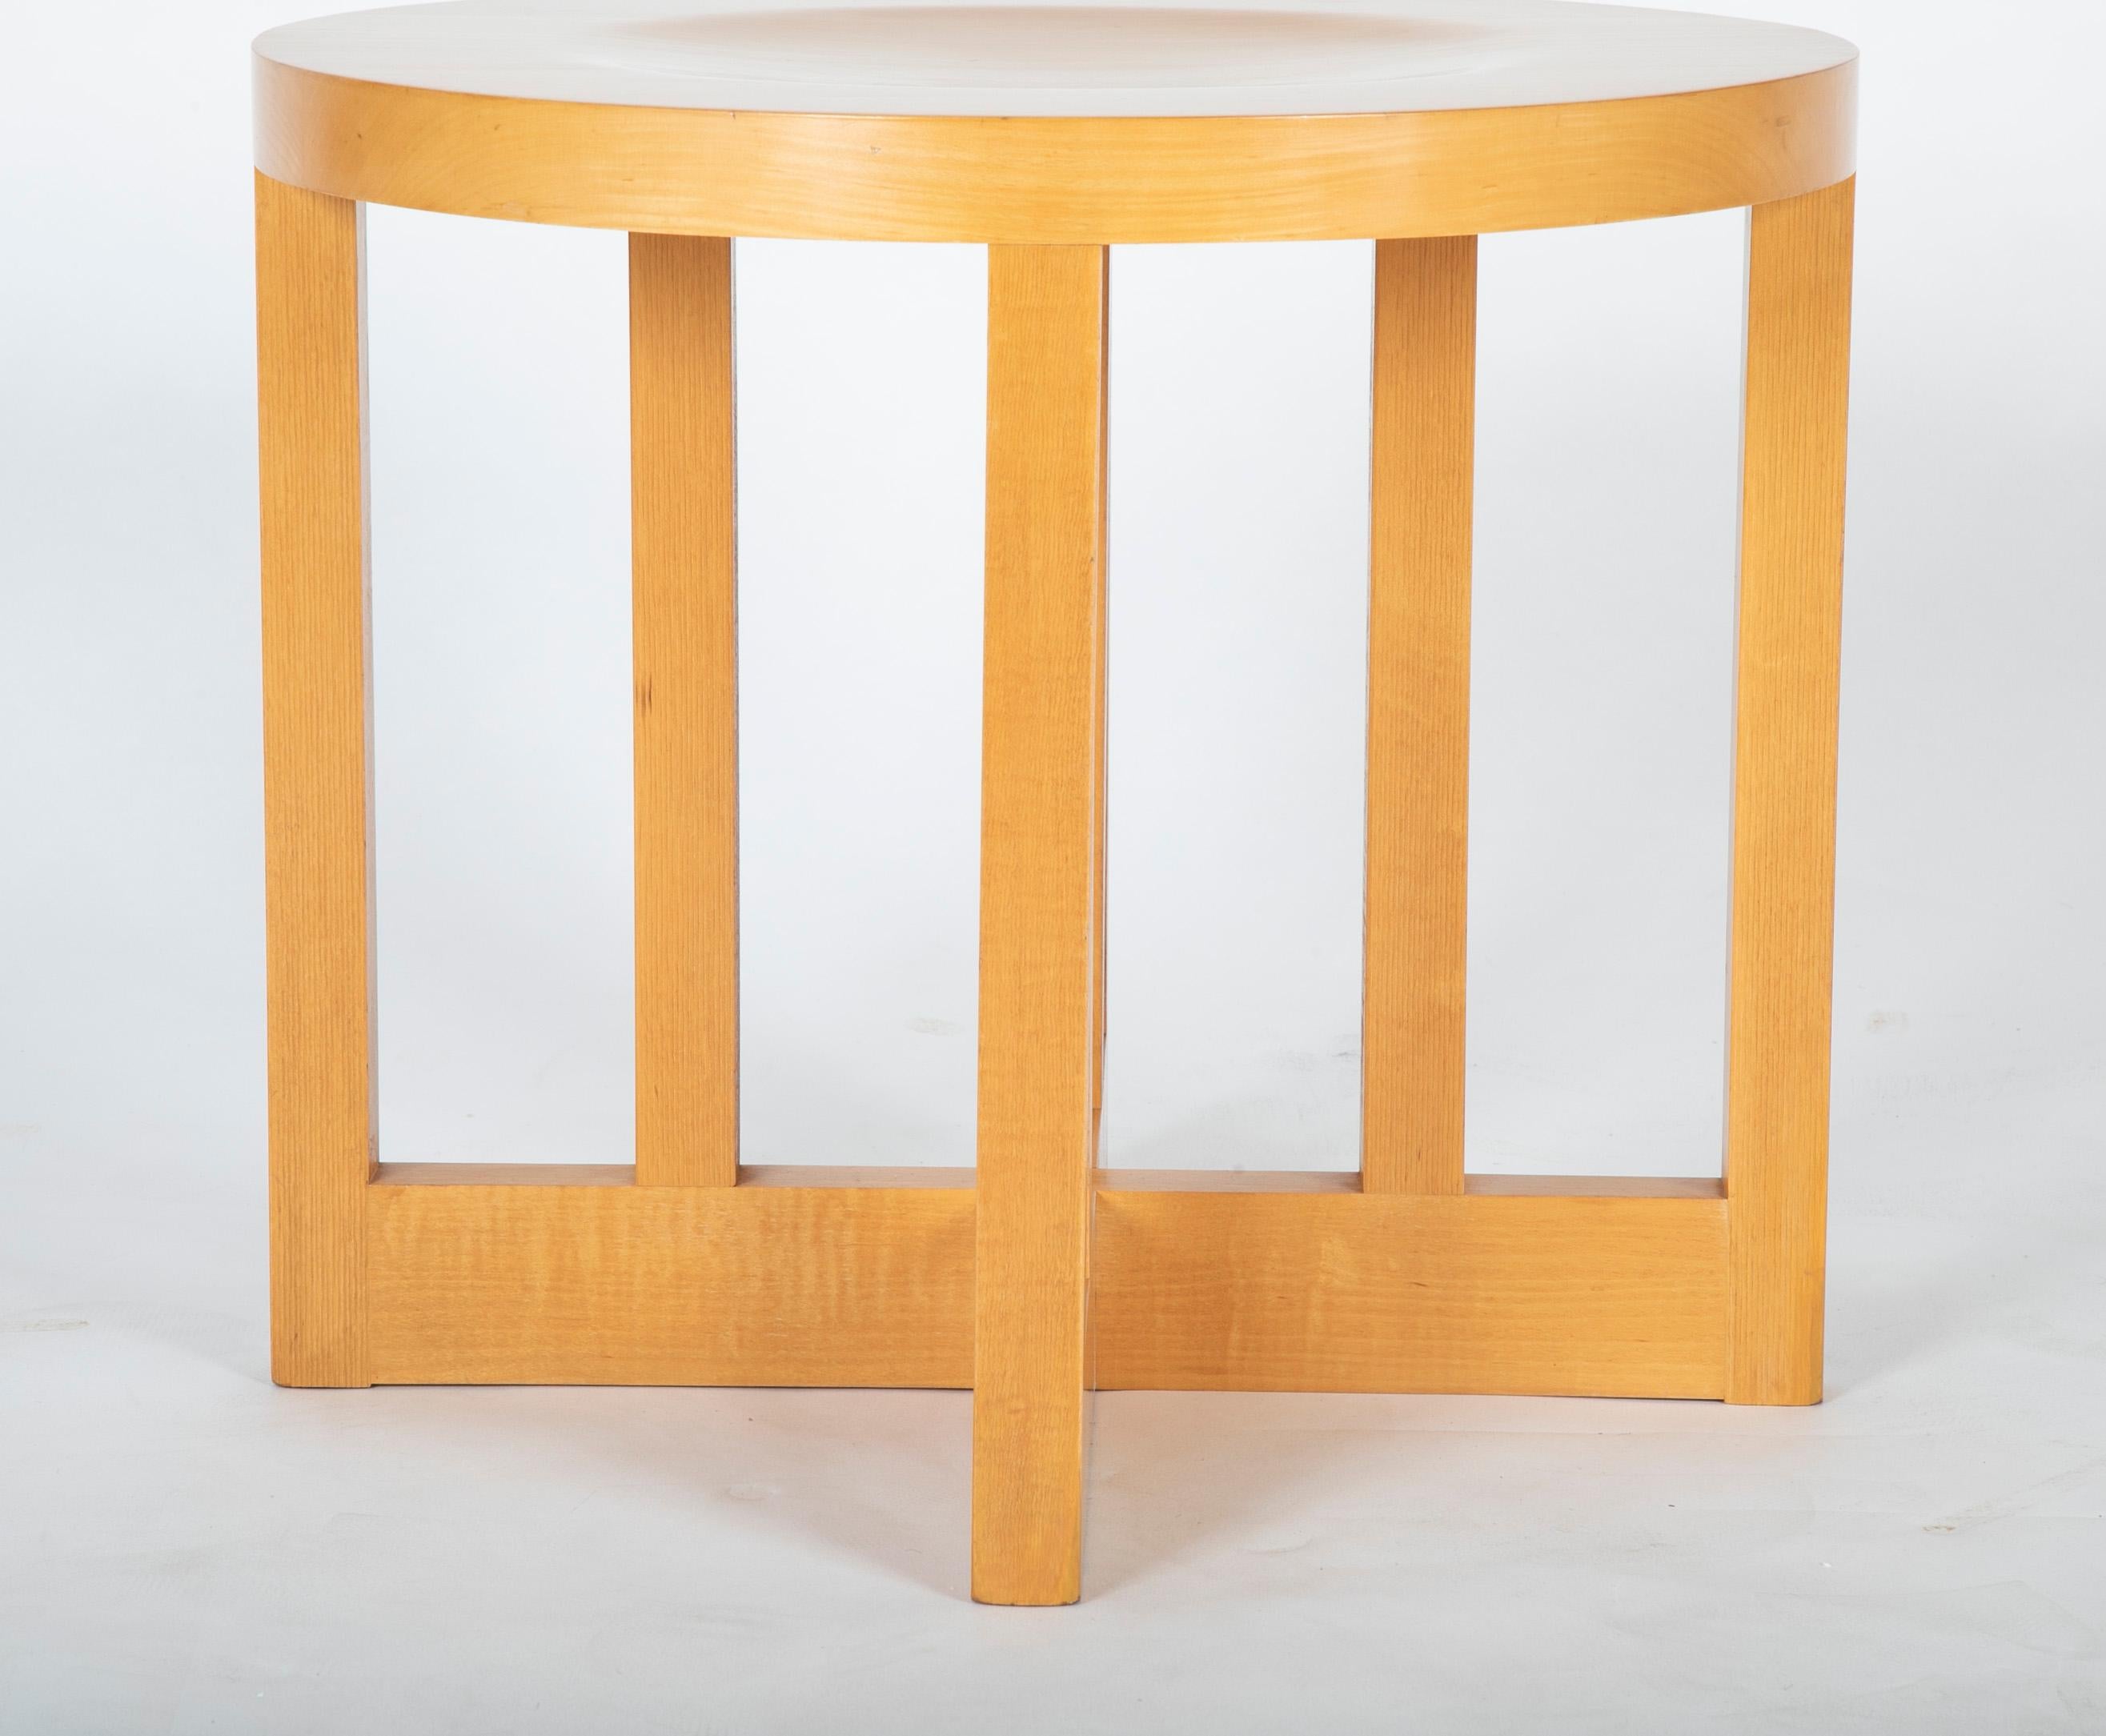 Late 20th Century Low Side Table or Stool Designed by Richard Meier for Knoll For Sale